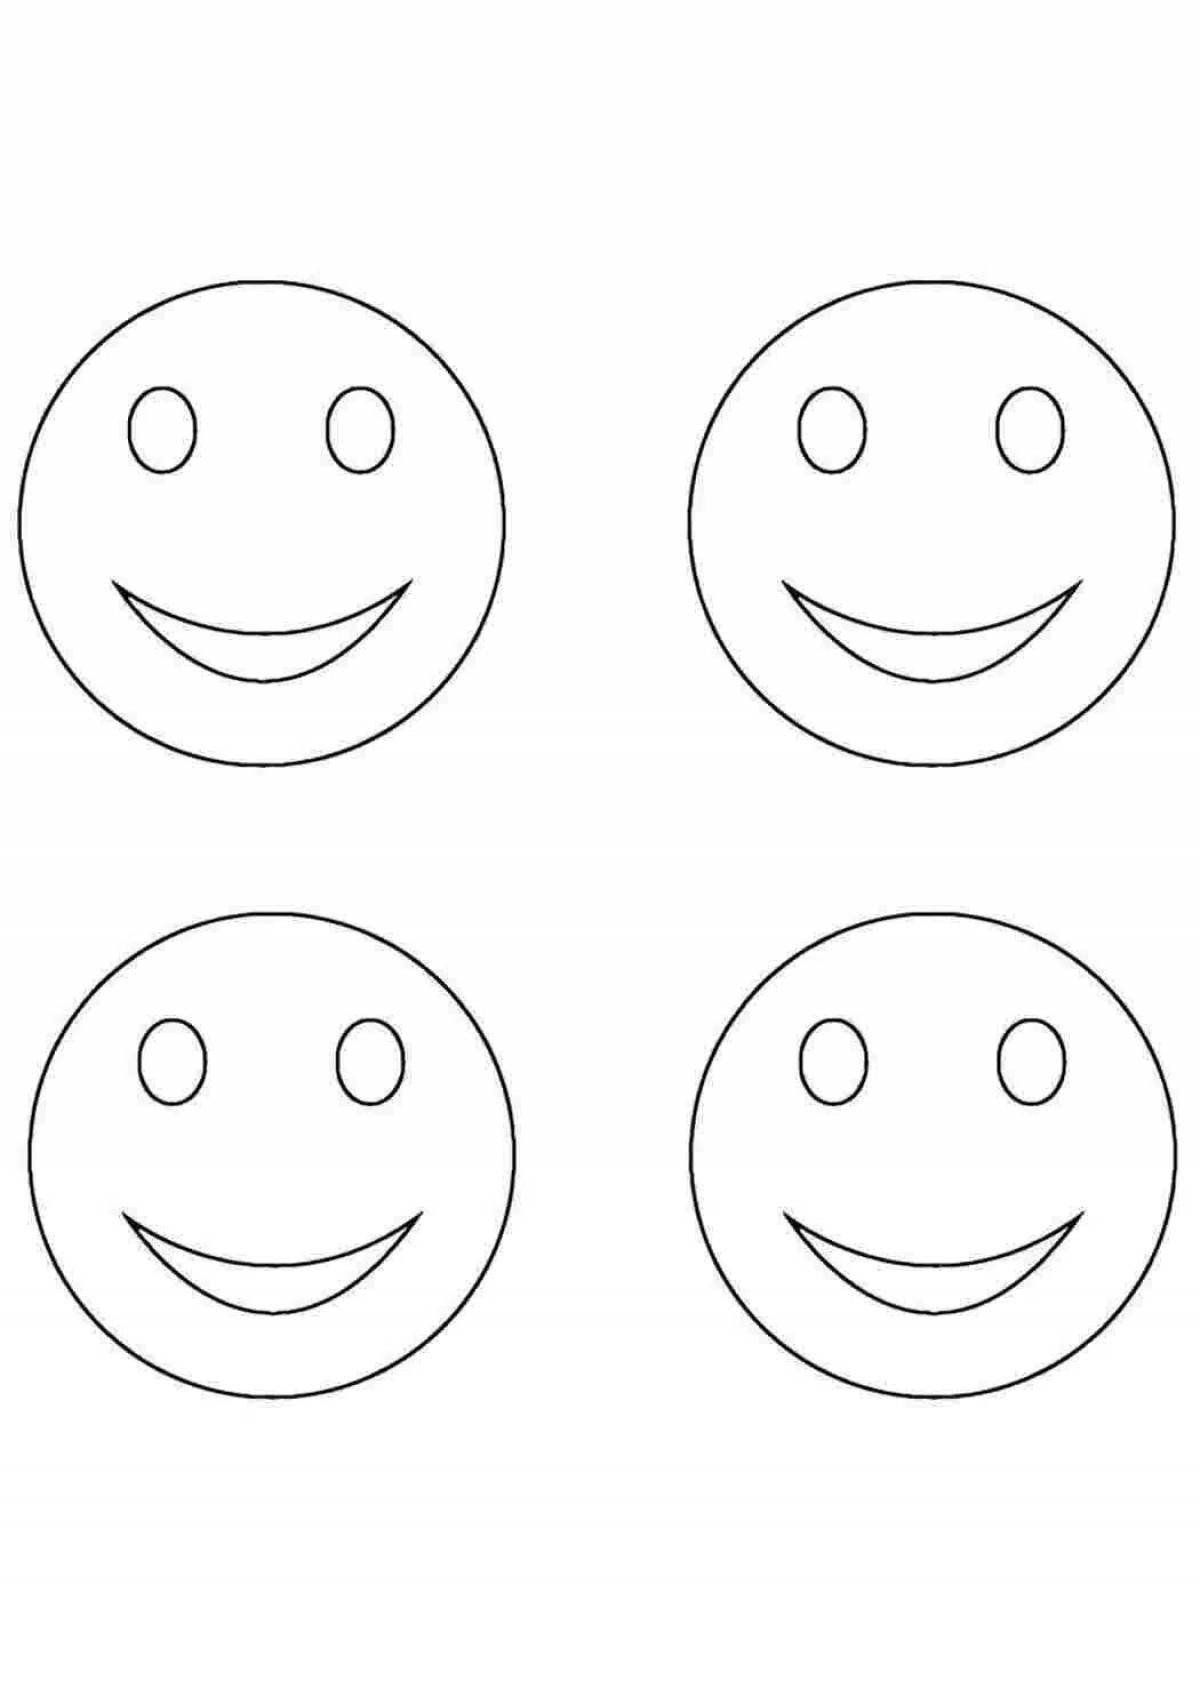 Attractive funny smiley coloring book for kids